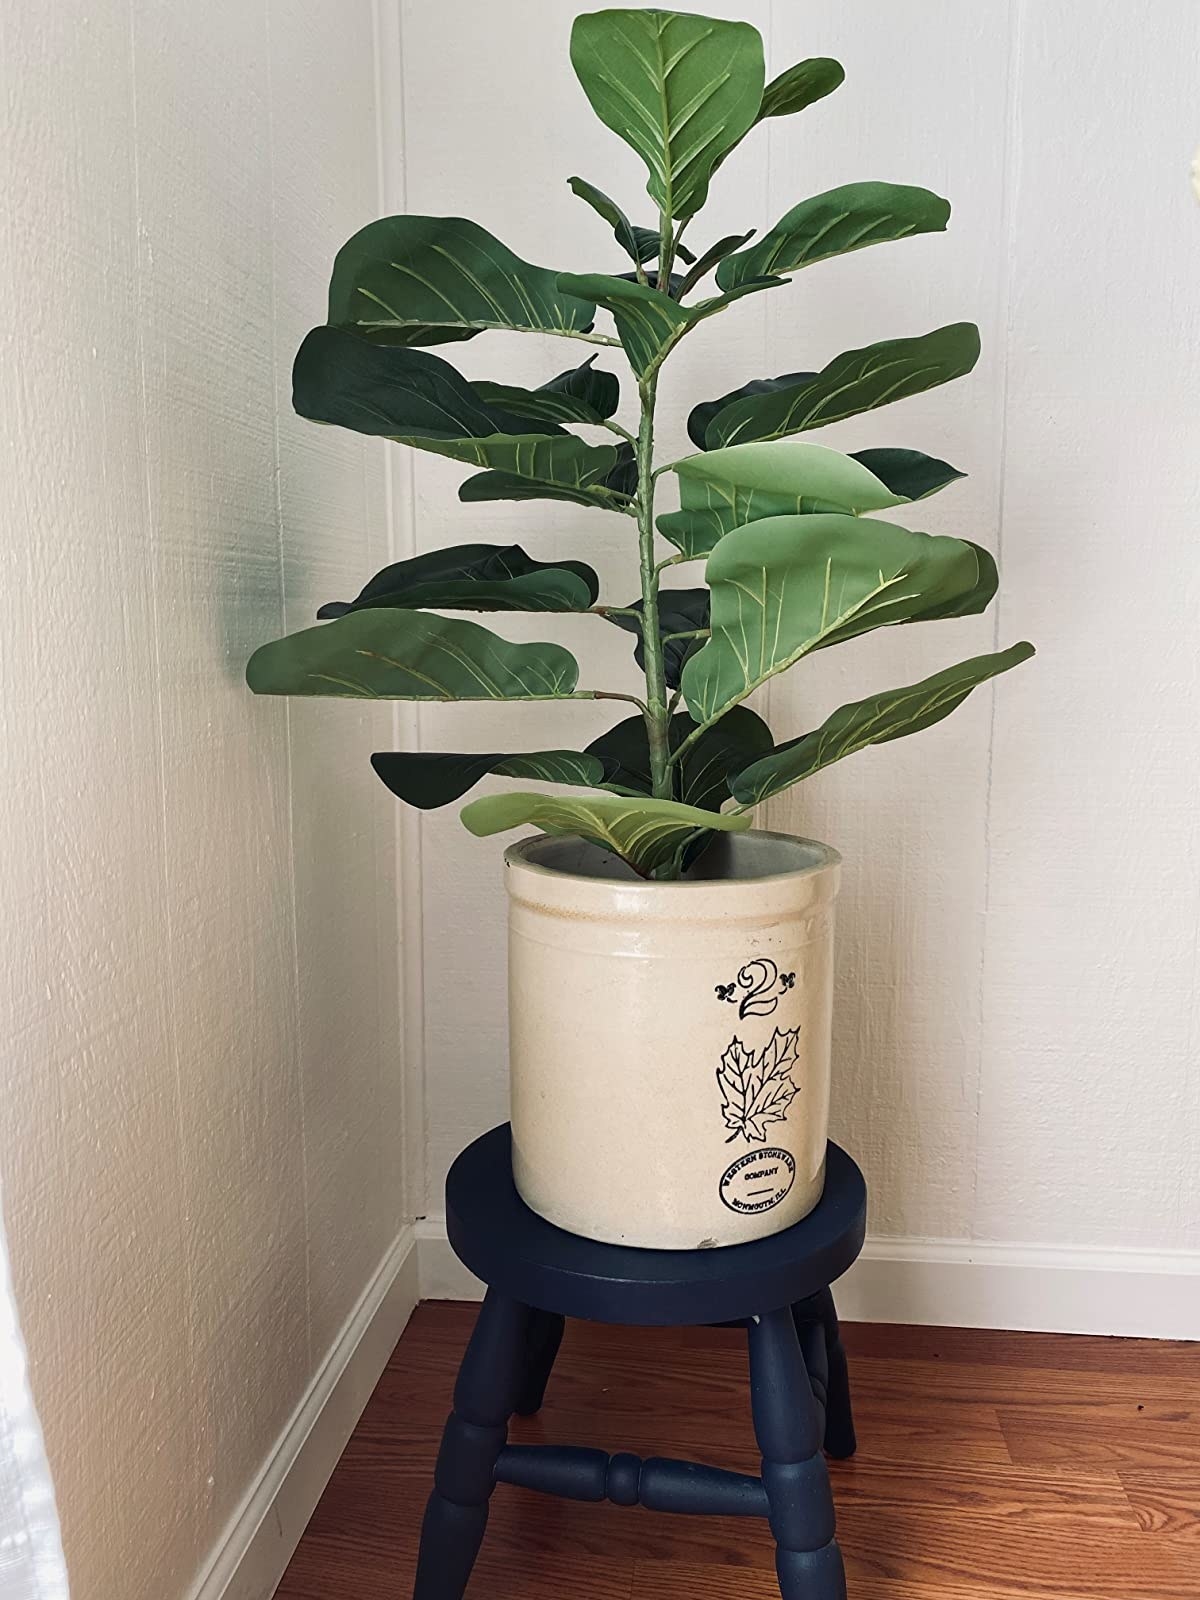 Reviewer image of faux plant in a crock on a blue stool